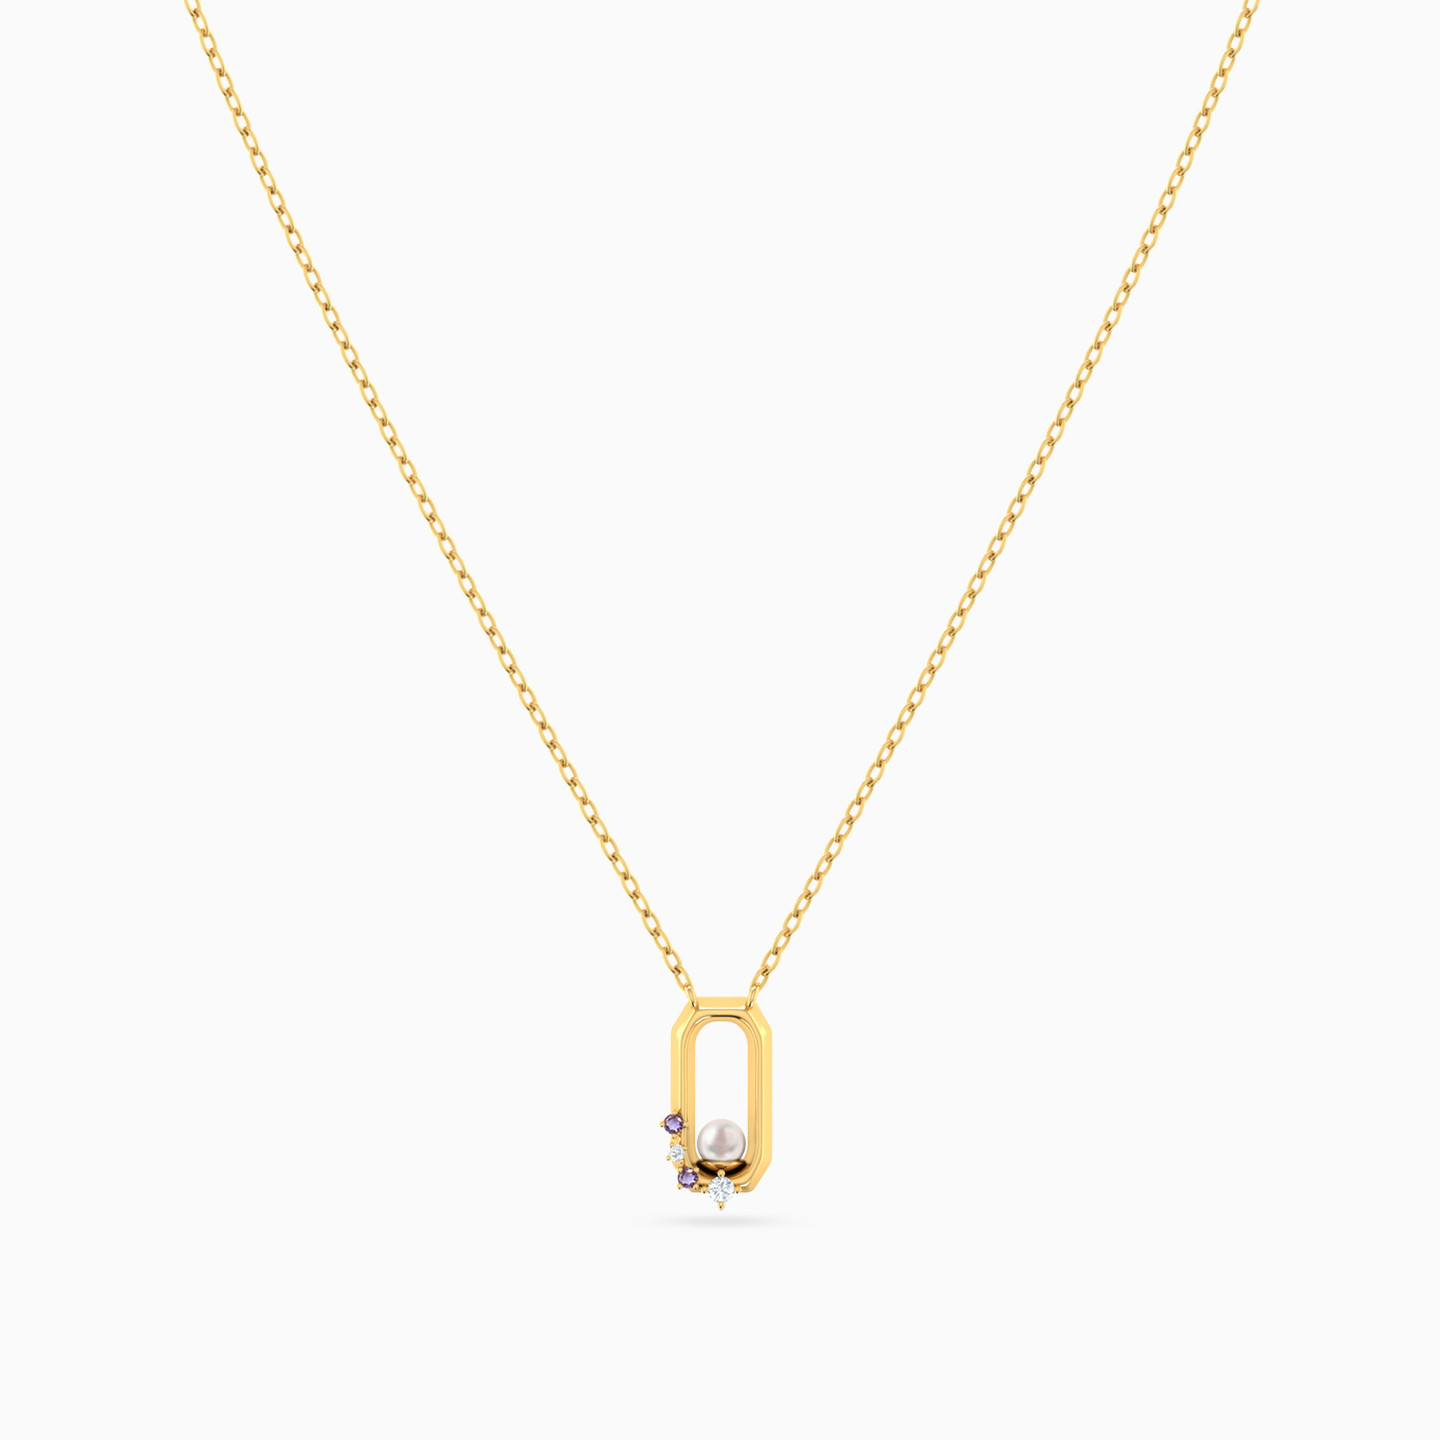 Rectangle Shaped Pearls & Colored Stones Pendant with 18K Gold Chain - 3